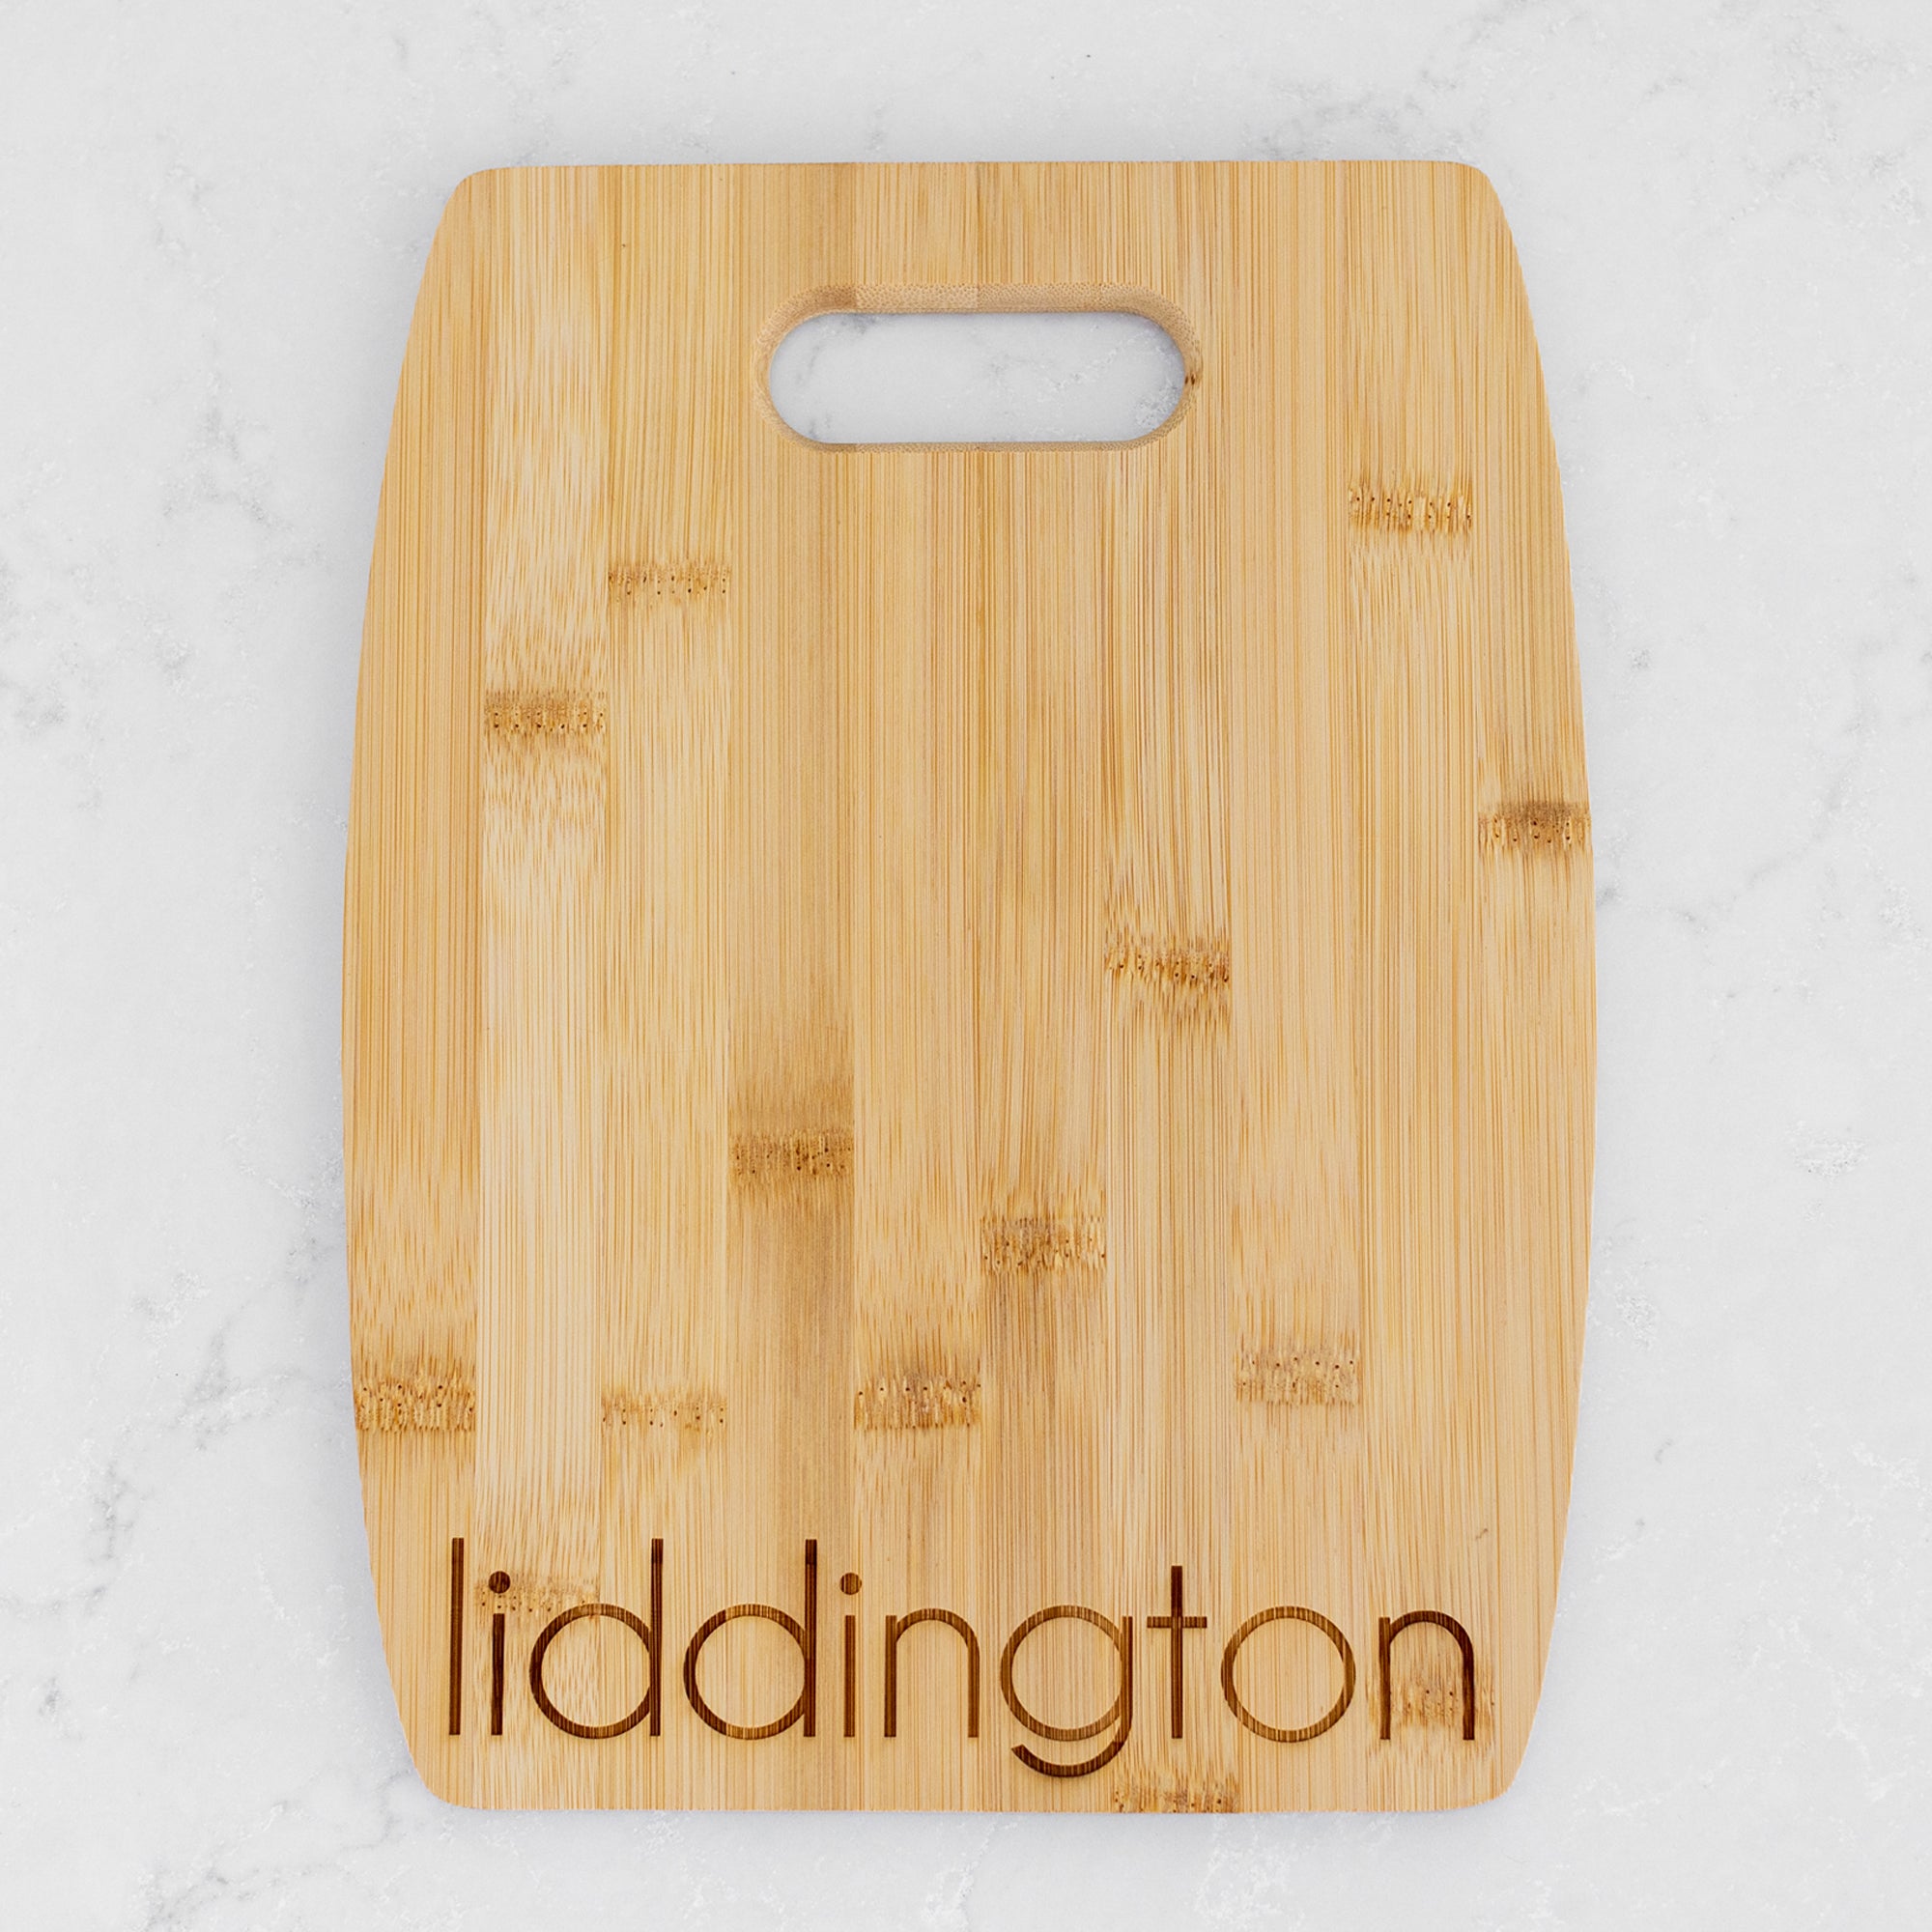 Personalized Bamboo Charcuterie Board with Name - 9 x 12 inches